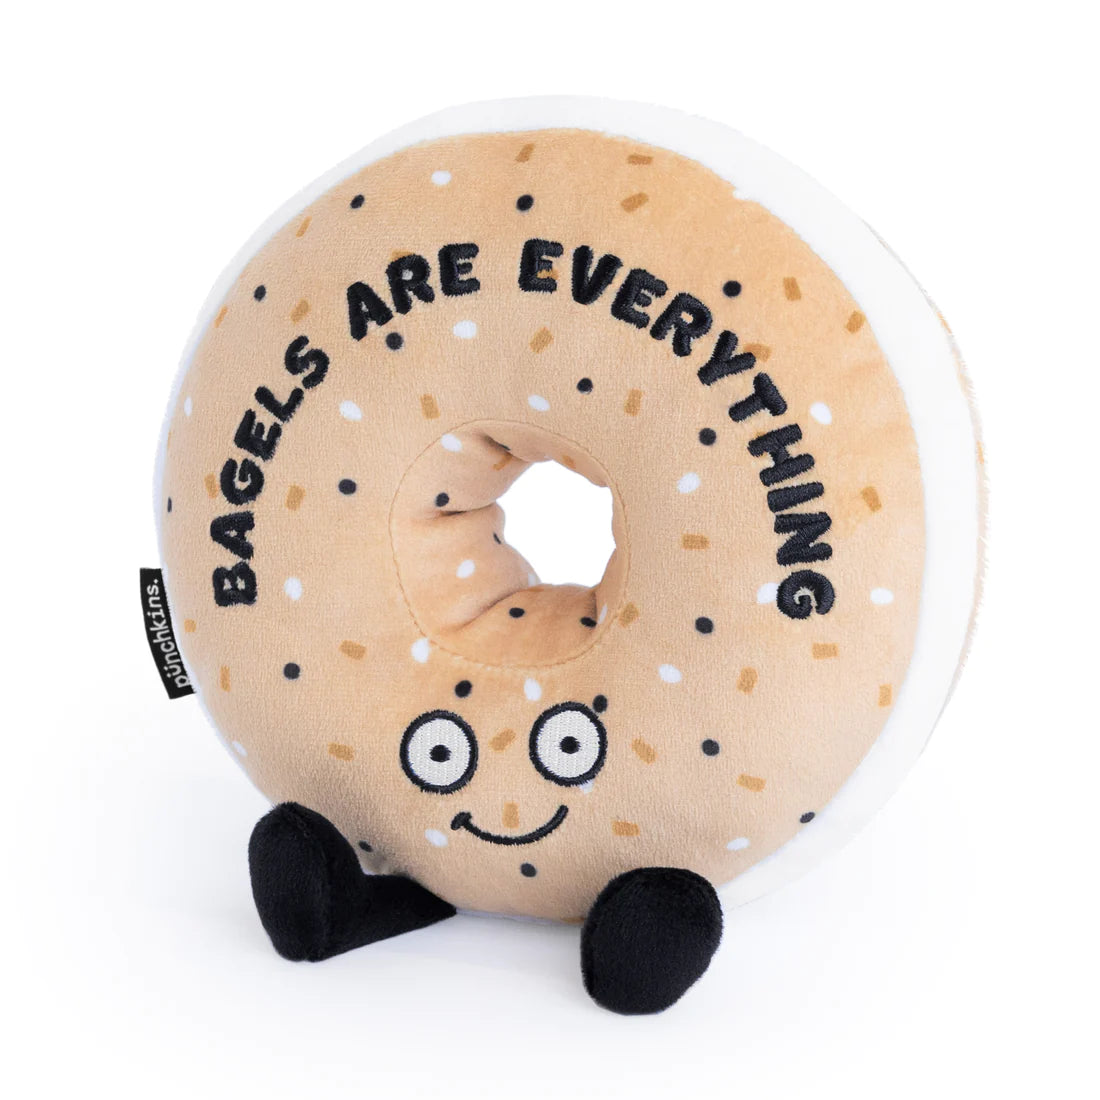 Punchkins - "Bagels are Everything" Plush Bagel Punchkins Punchkins    | Red Claw Gaming